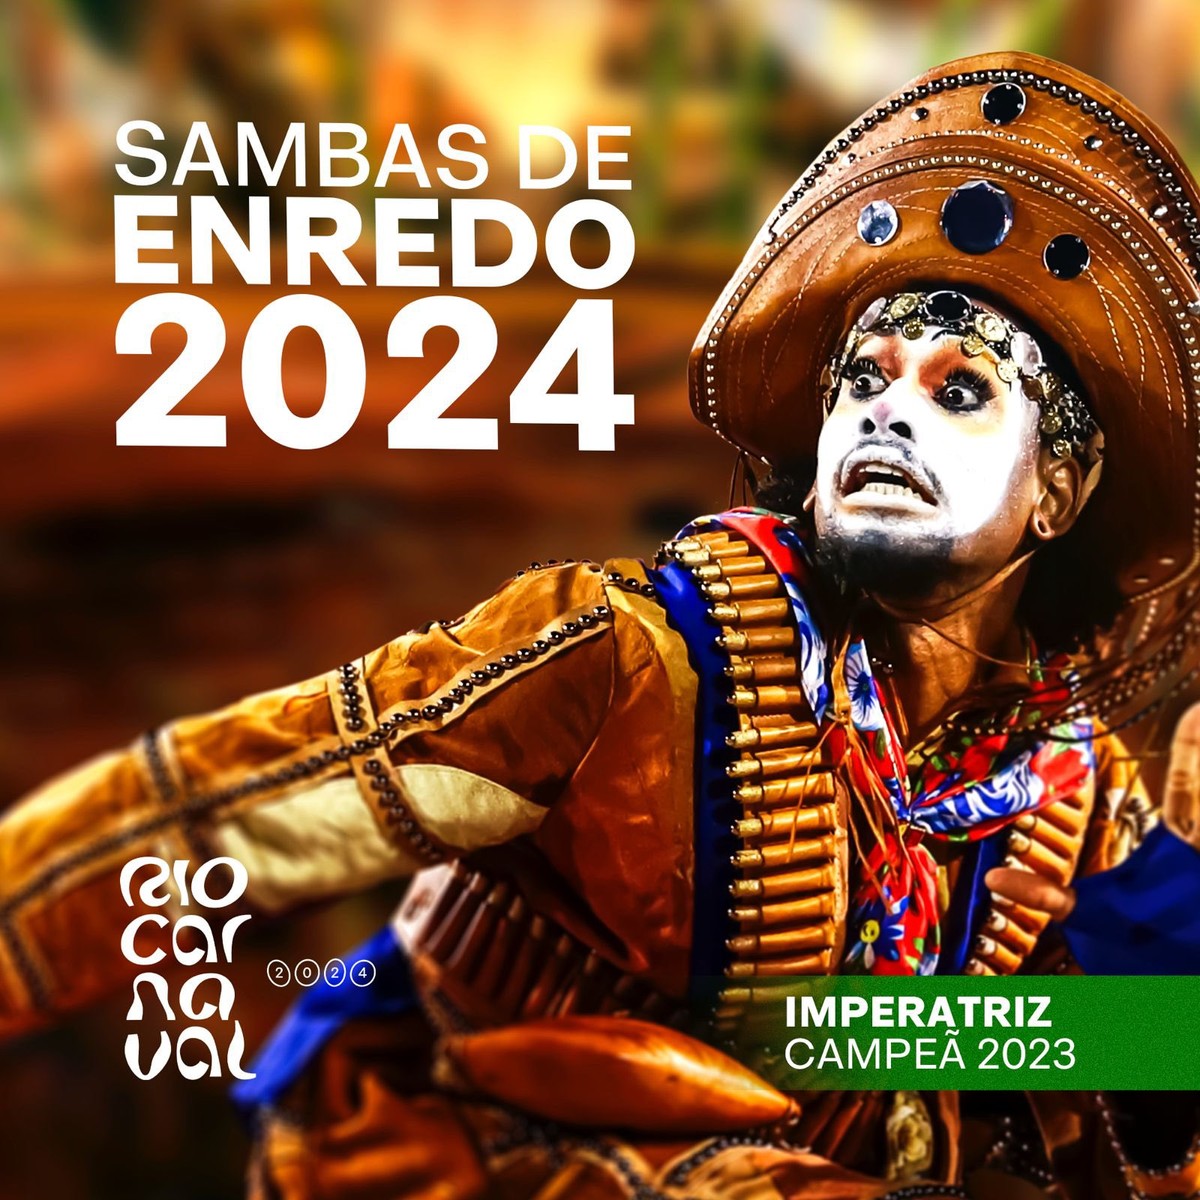 Records with sambas from Carnival 2024 open their doors in December for